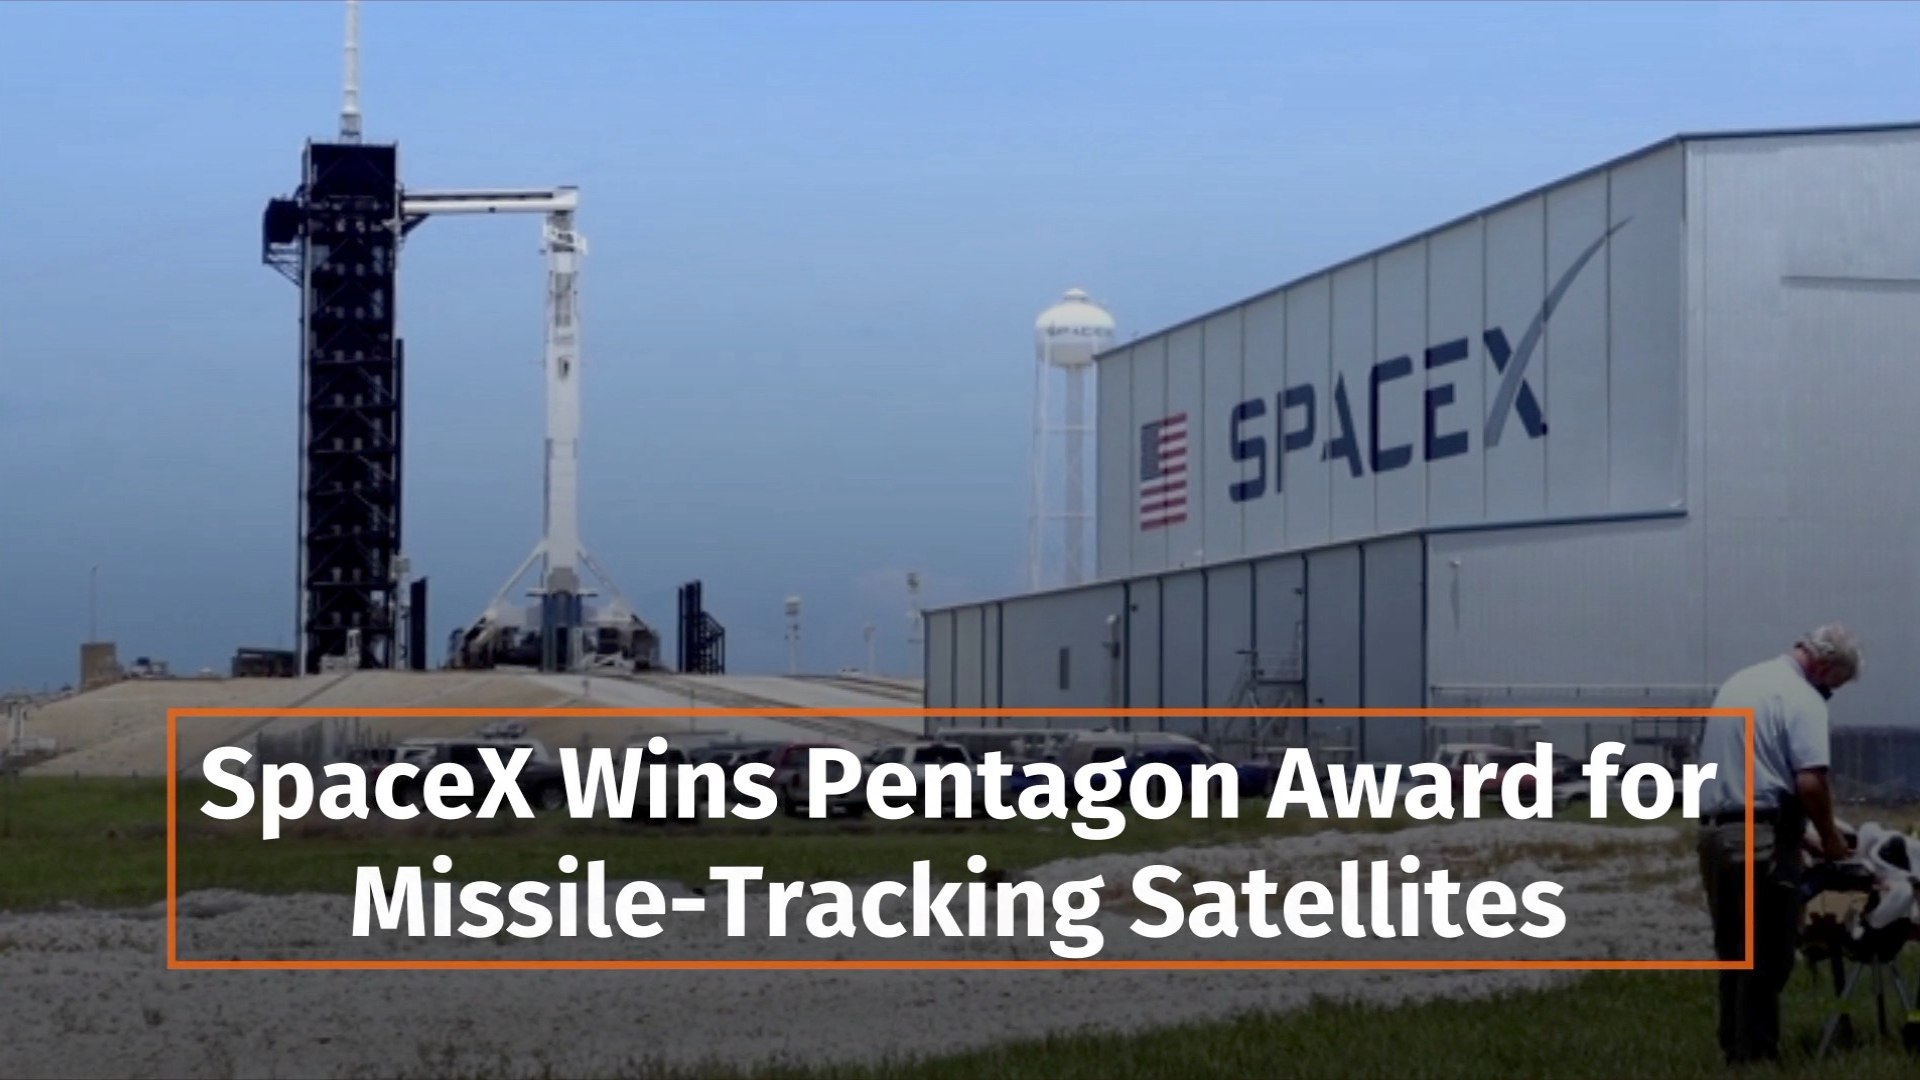 SpaceX has been a huge help to the Pentagon in terms of technology and innovation. Their products ha